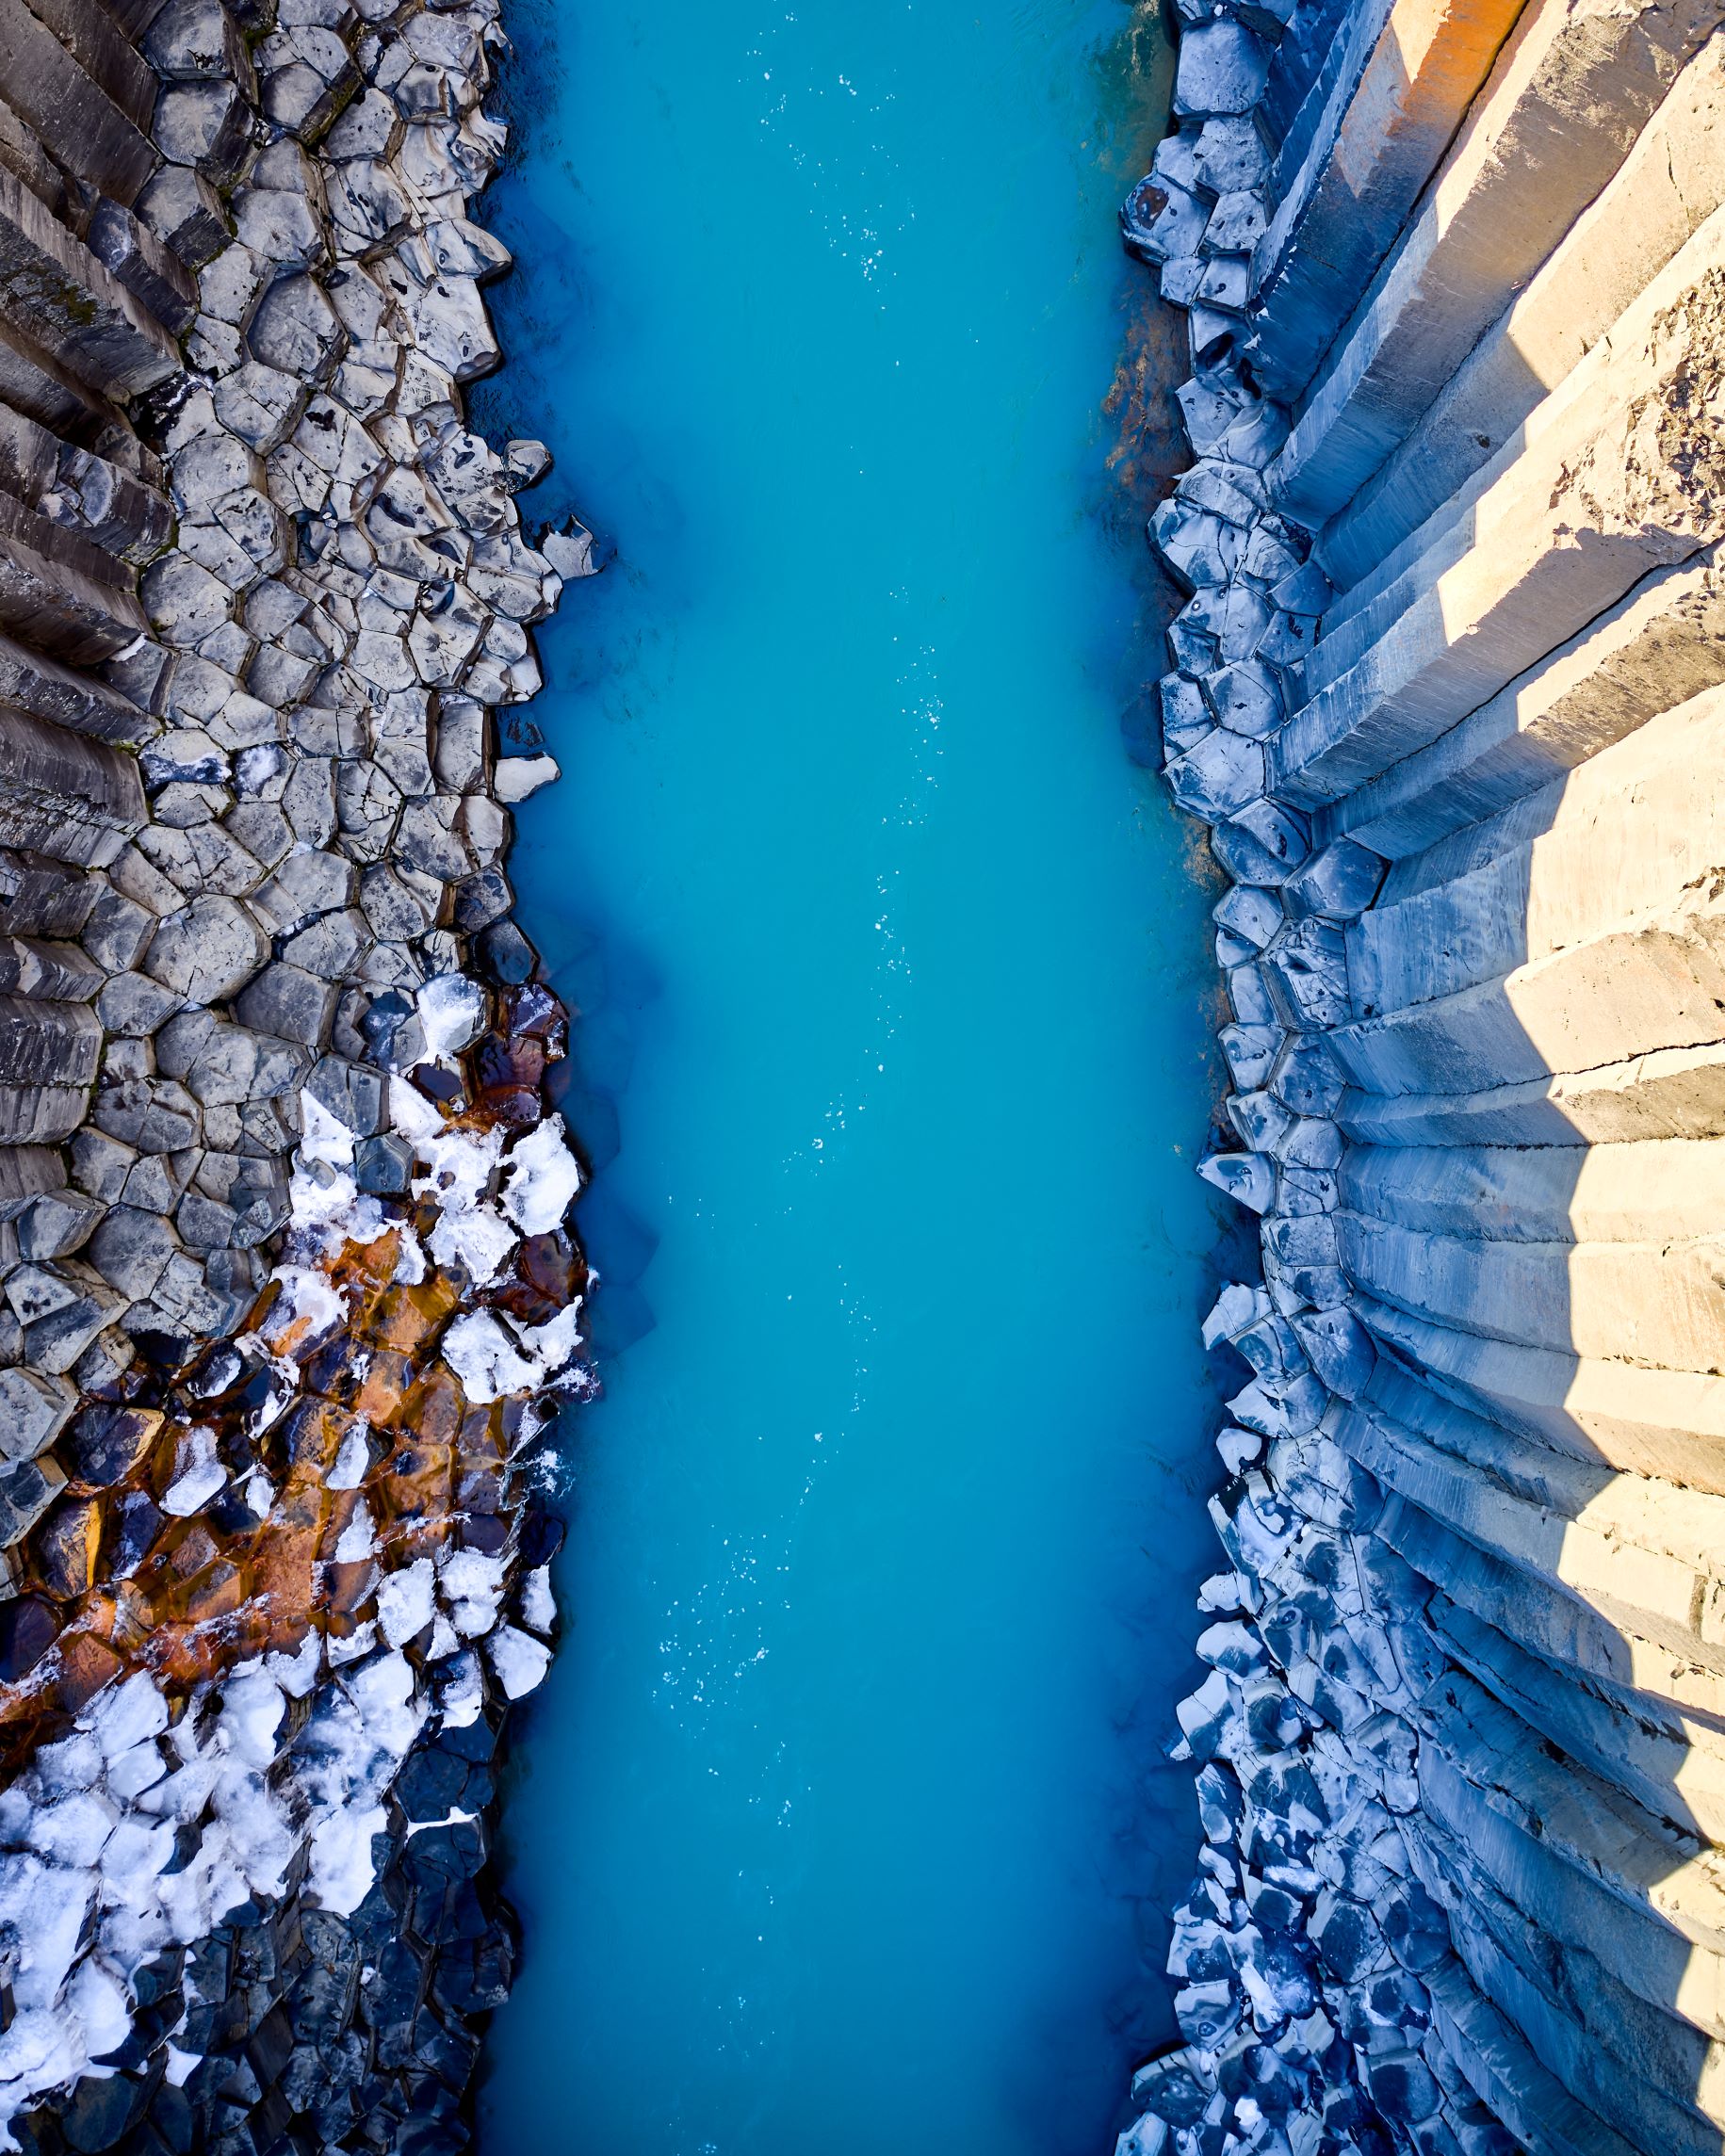 A drone shot of Stuðlagil canyon, showing the basalt columns surrounding a blue-water river